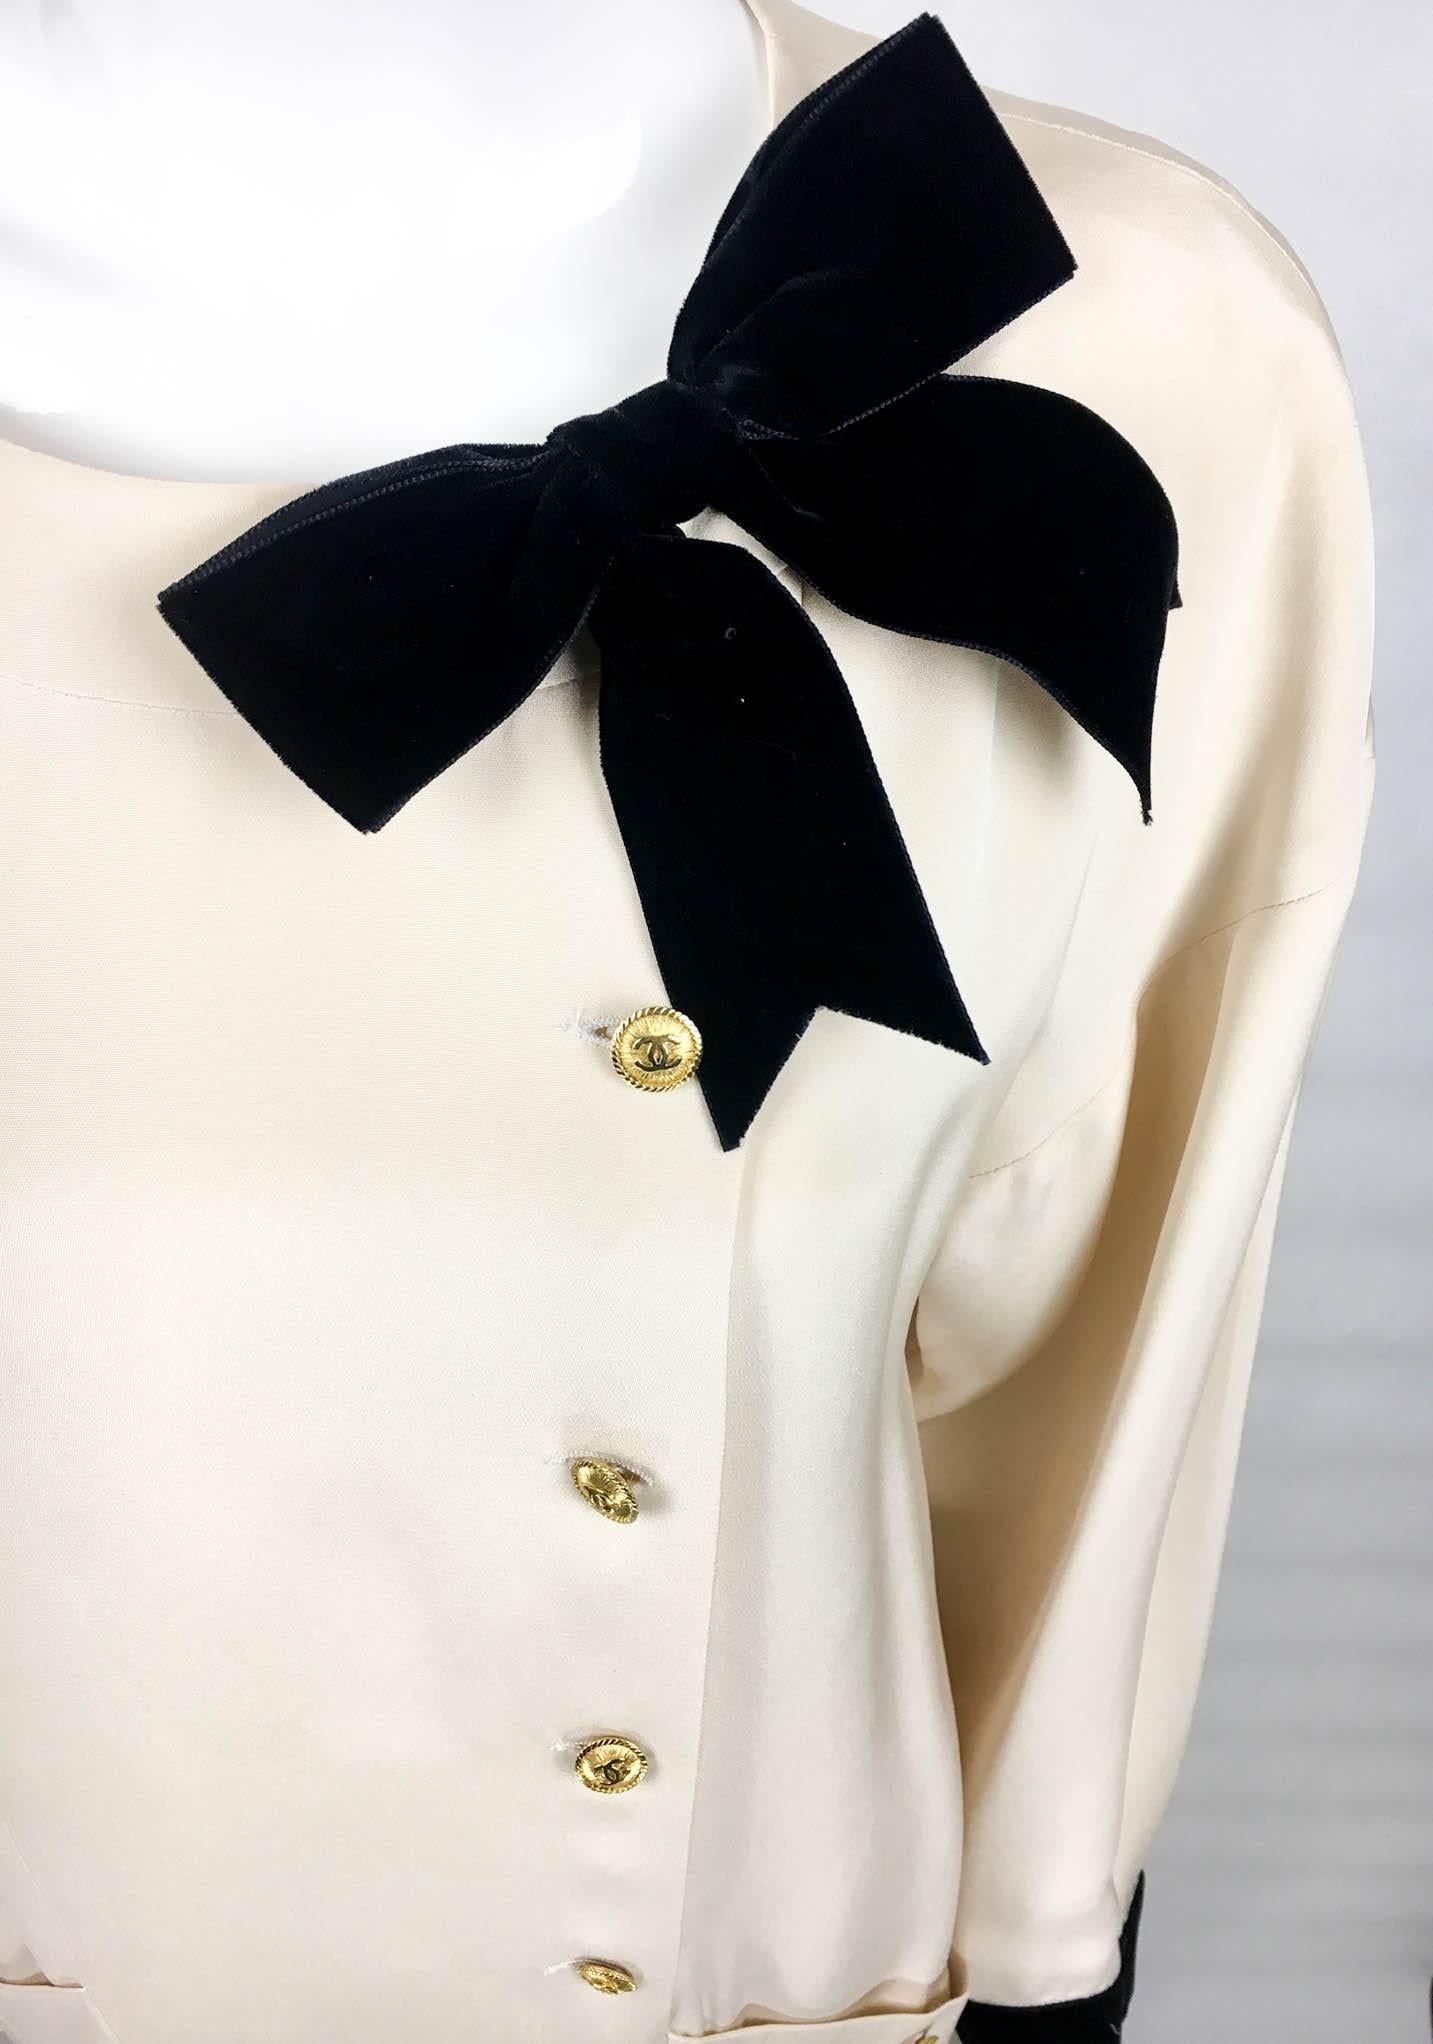 Chanel Champagne Silk Dress With Black Velvet Cuffs and Bow - 1980s For Sale 3